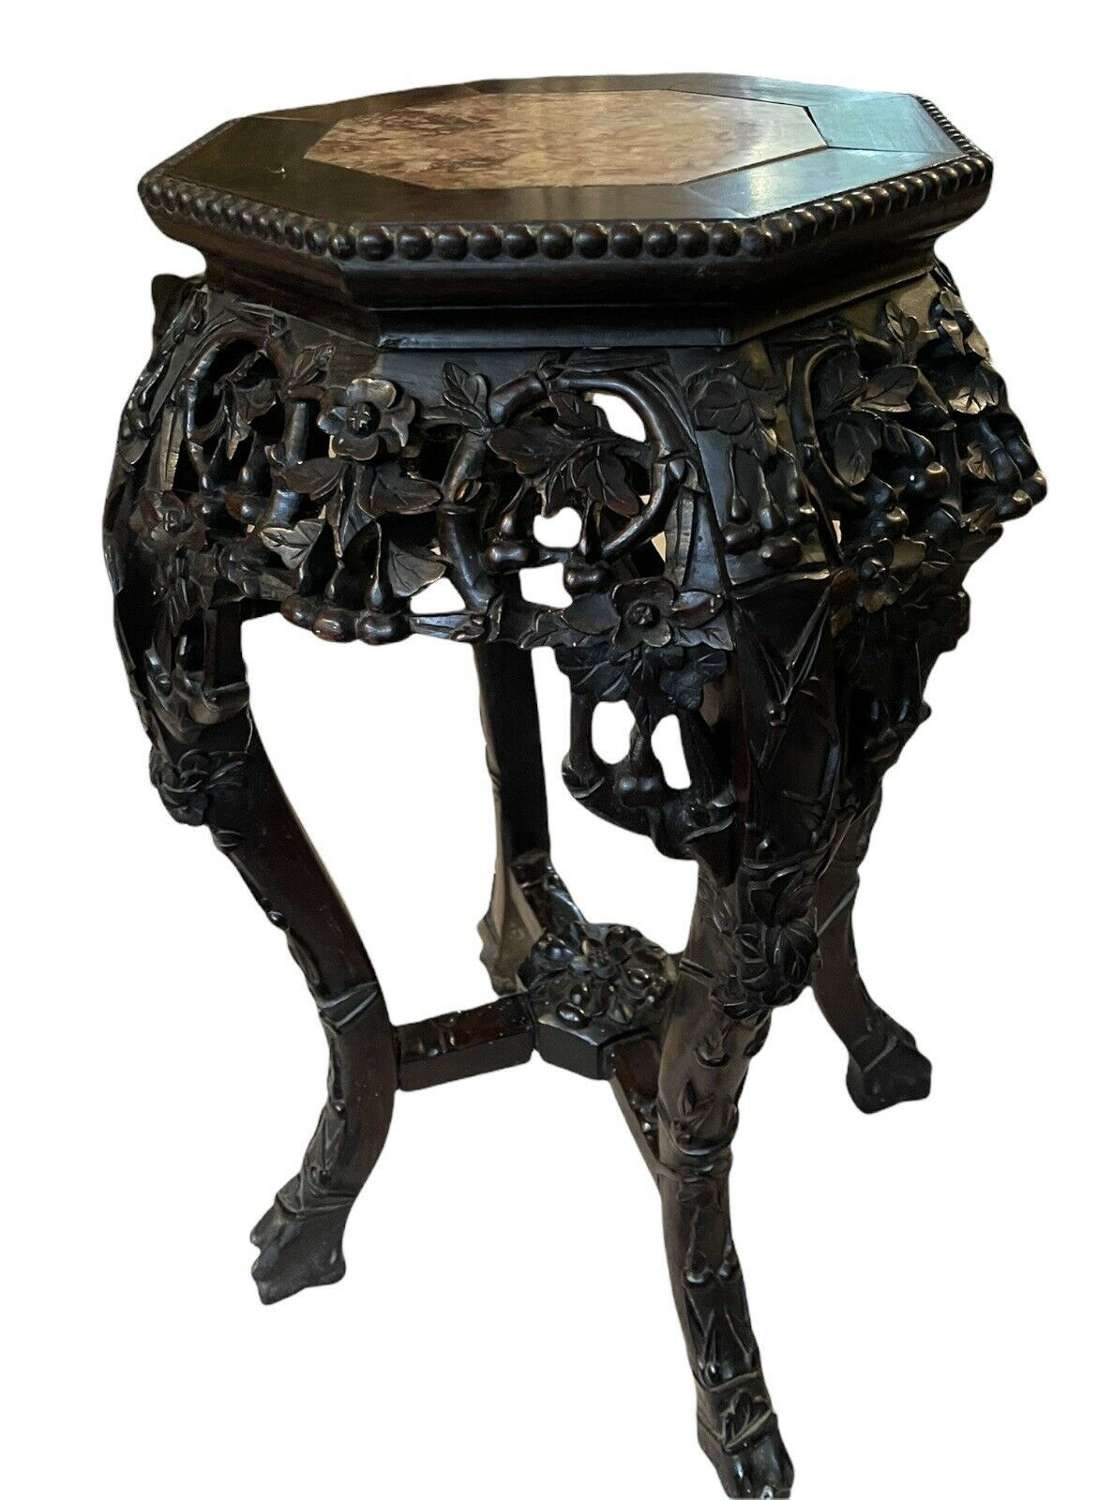 19th Century Chinese plant stand